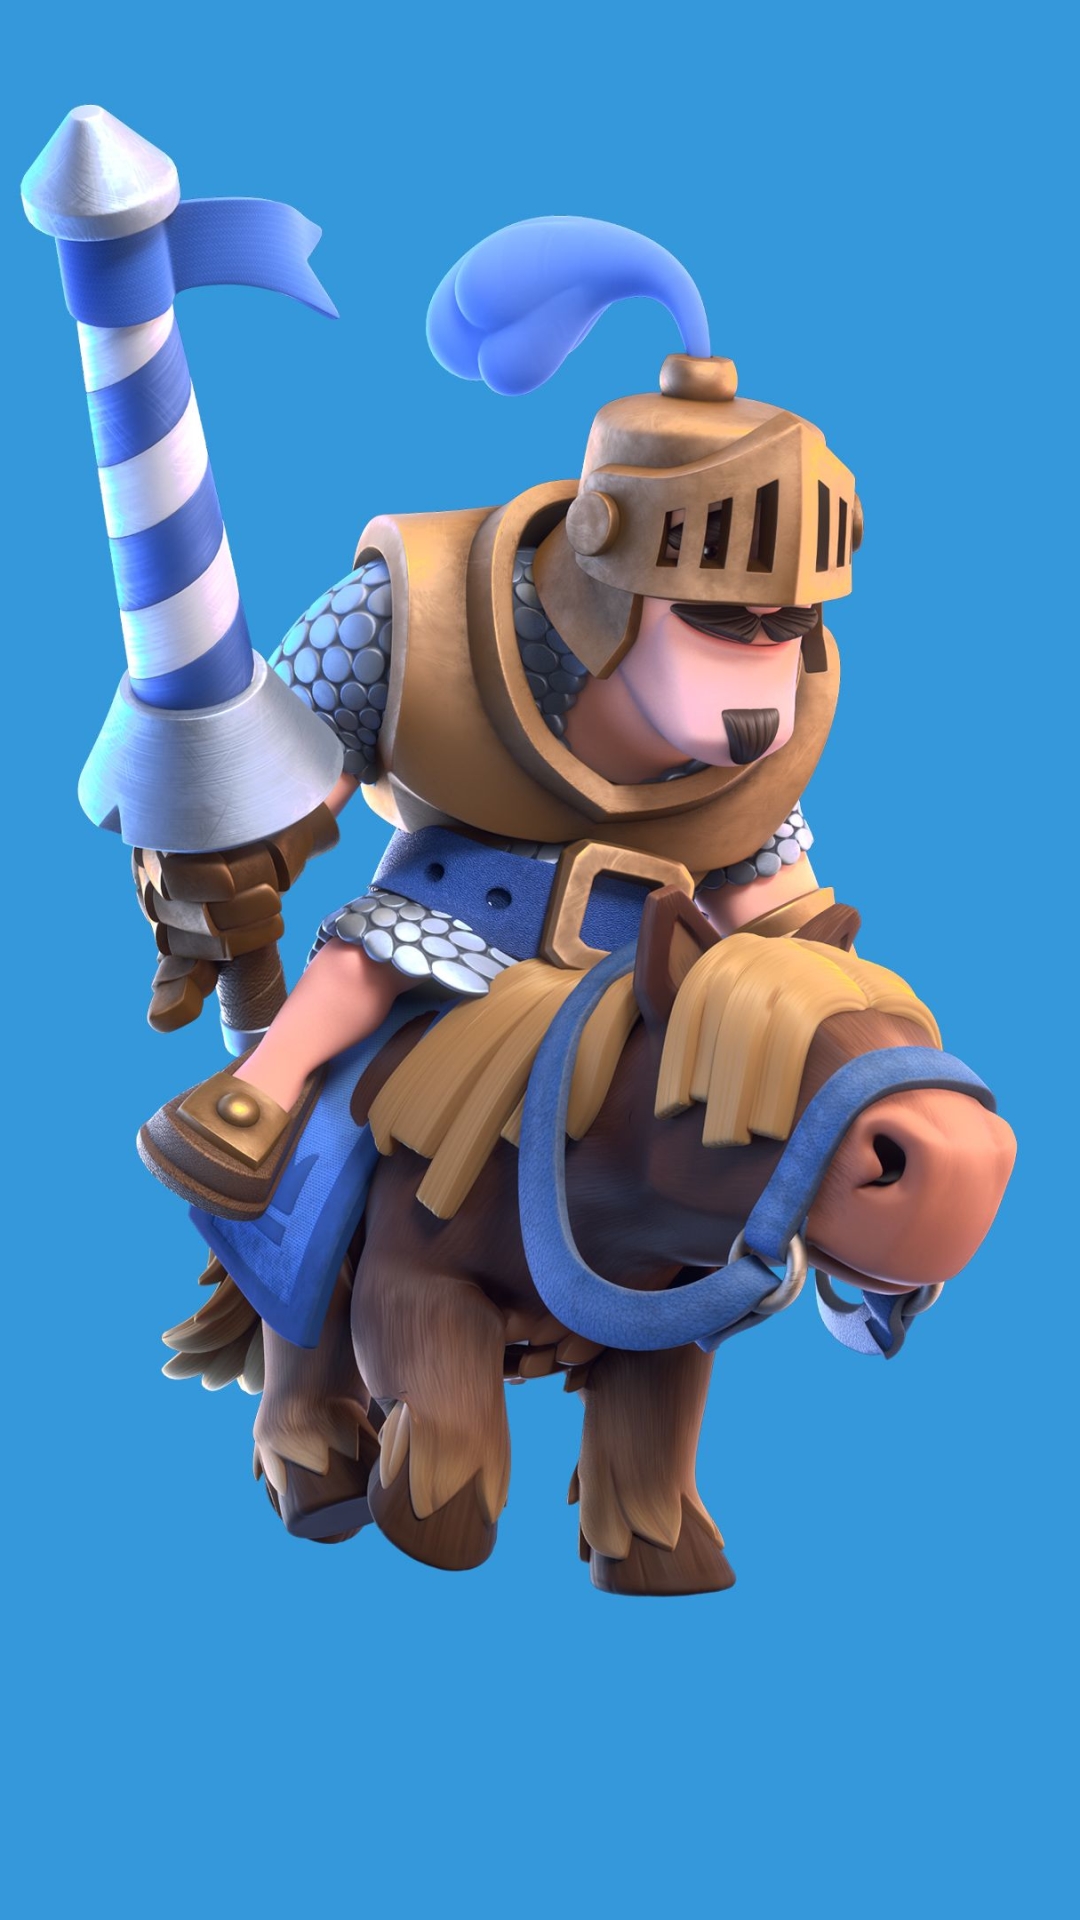 Video Game / Clash Royale Mobile Wallpaper - Clash Royale Prince Png , HD Wallpaper & Backgrounds